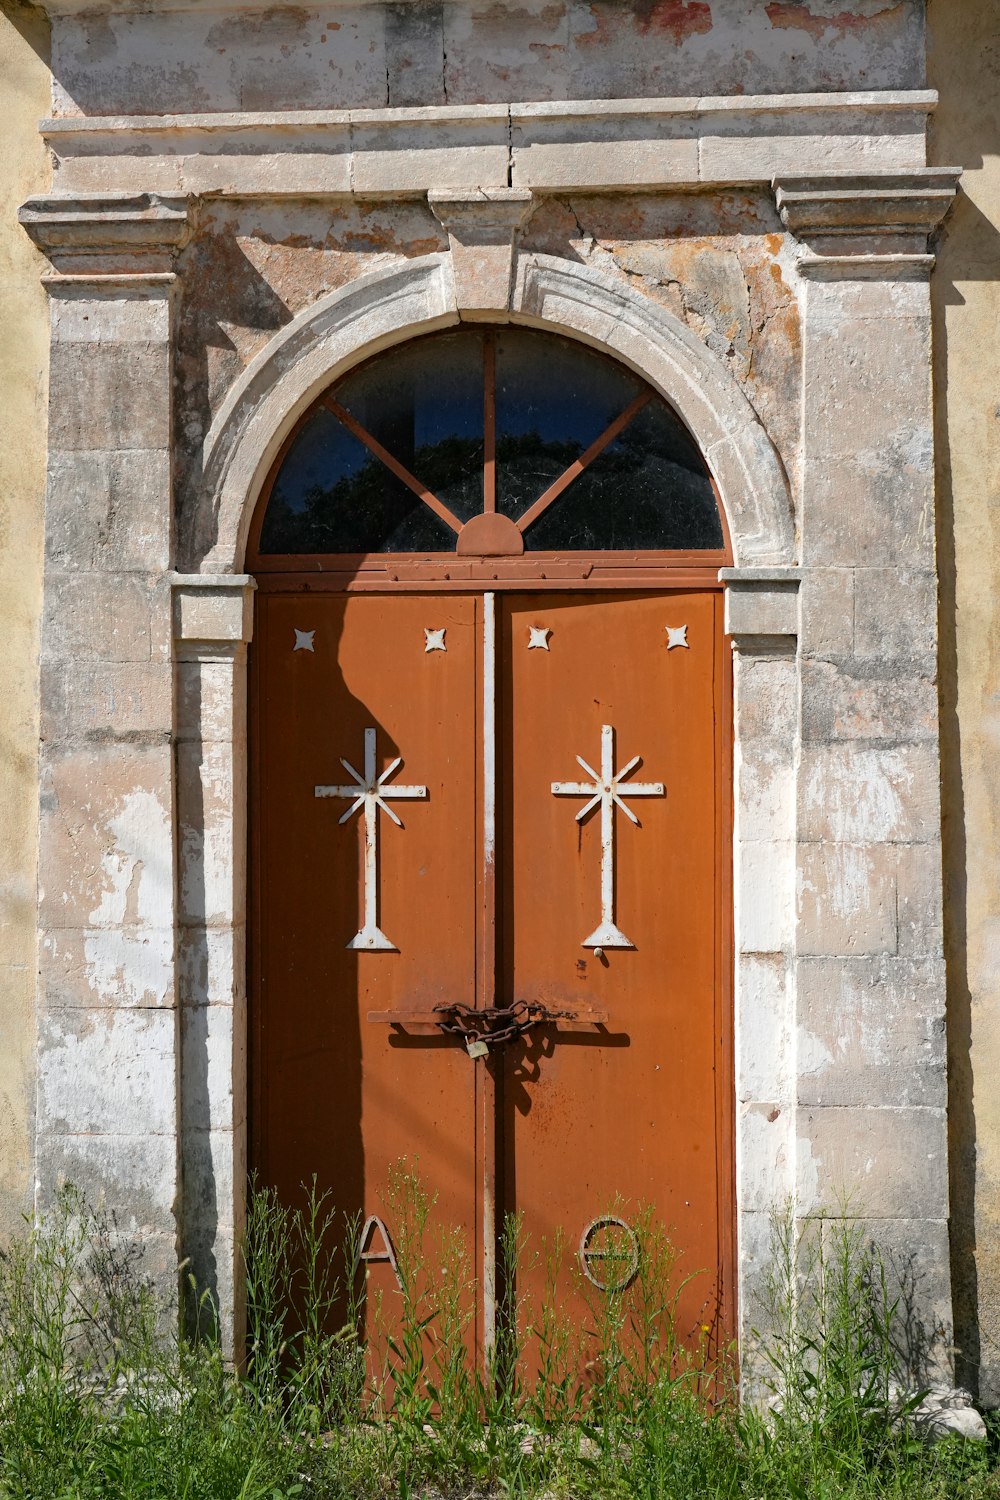 a red door with crosses on it in front of a building